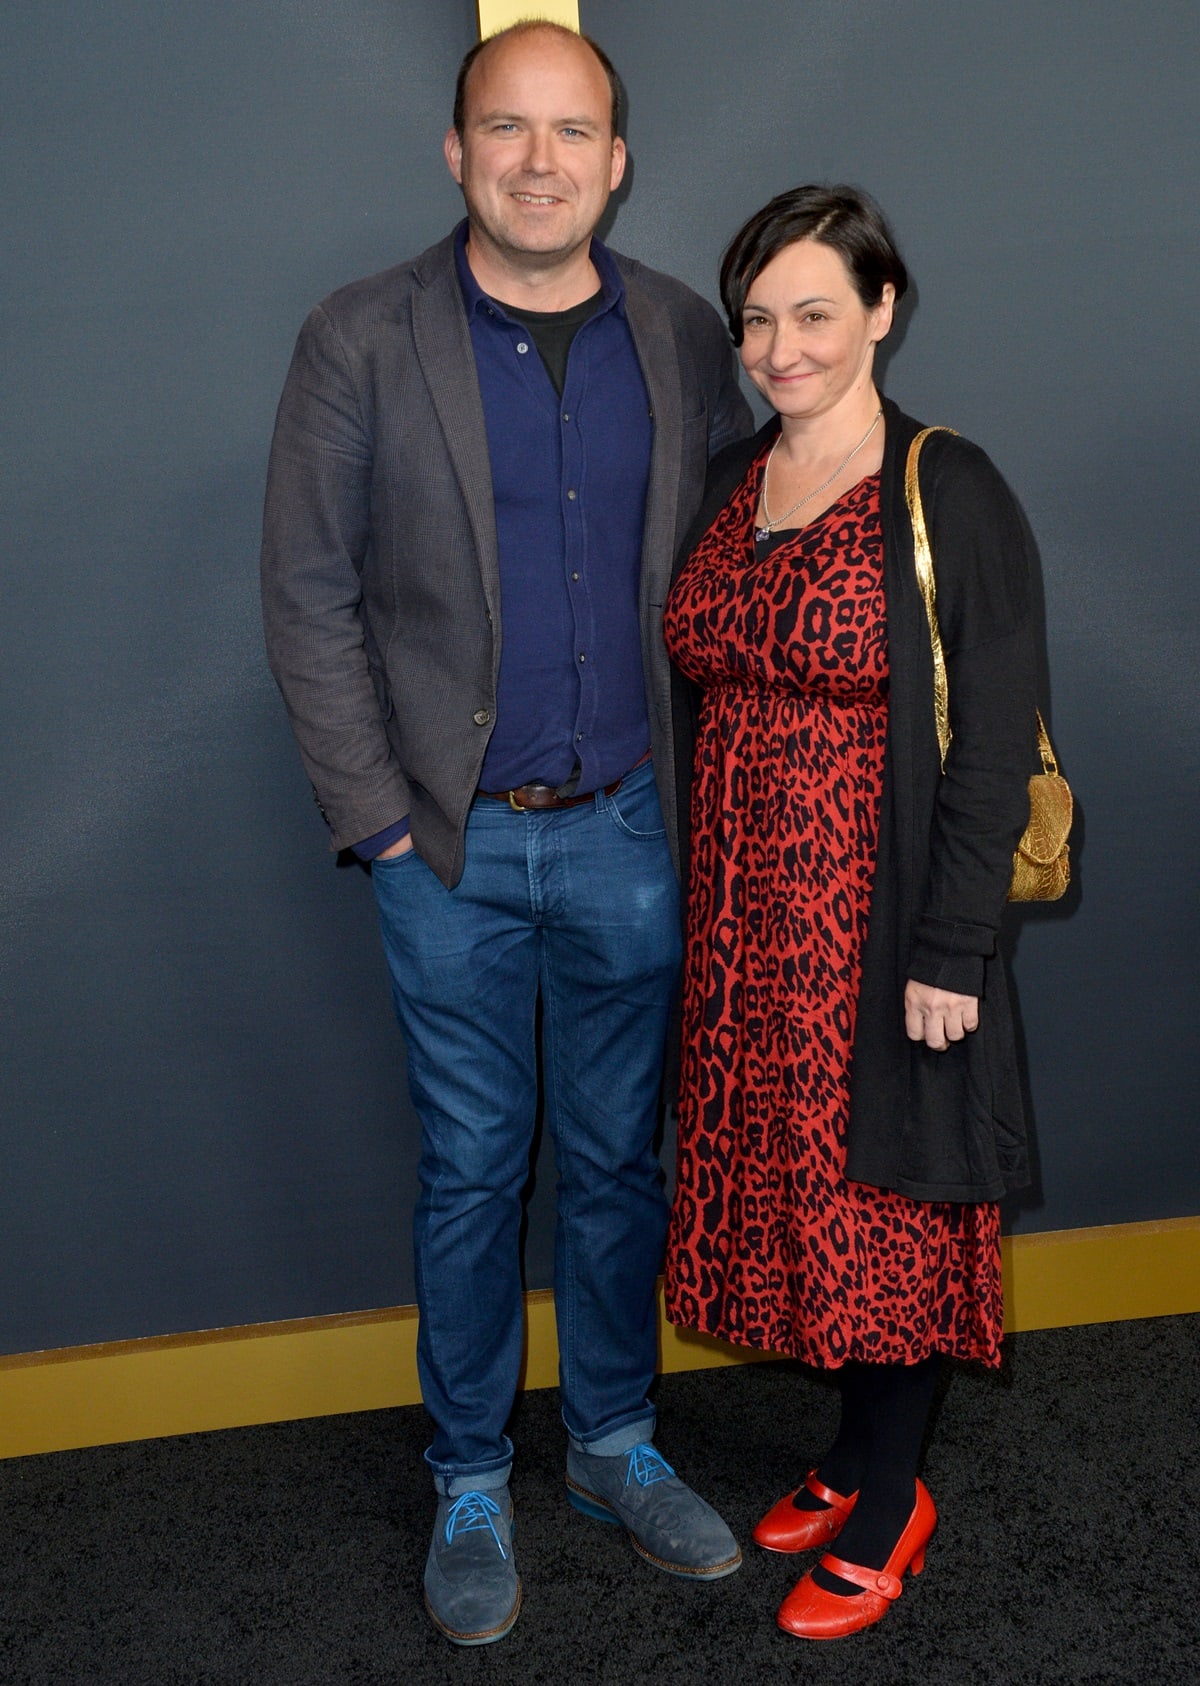 Posing with his wife, Pandora Colin (née Pandora Ormsby-Gore), Rory Kinnear is a British actor, standing at 6 feet (182.9 cm) tall, who is best known for his roles in Quantum of Solace, Skyfall, The Imitation Game, and the TV show Penny Dreadful